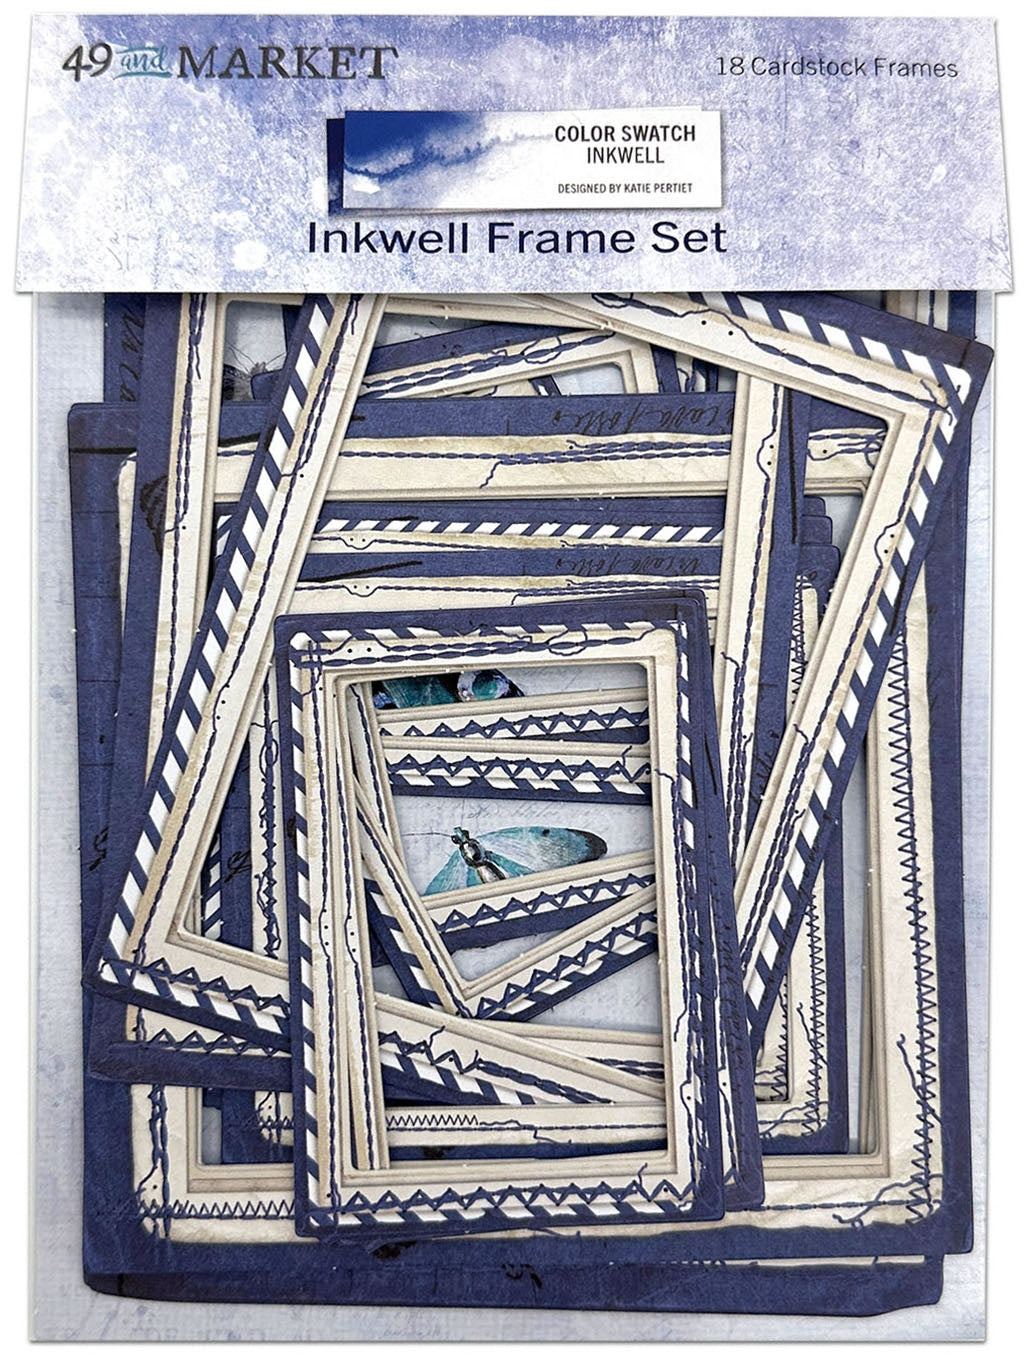 49 and Market Frames set - Inkwell